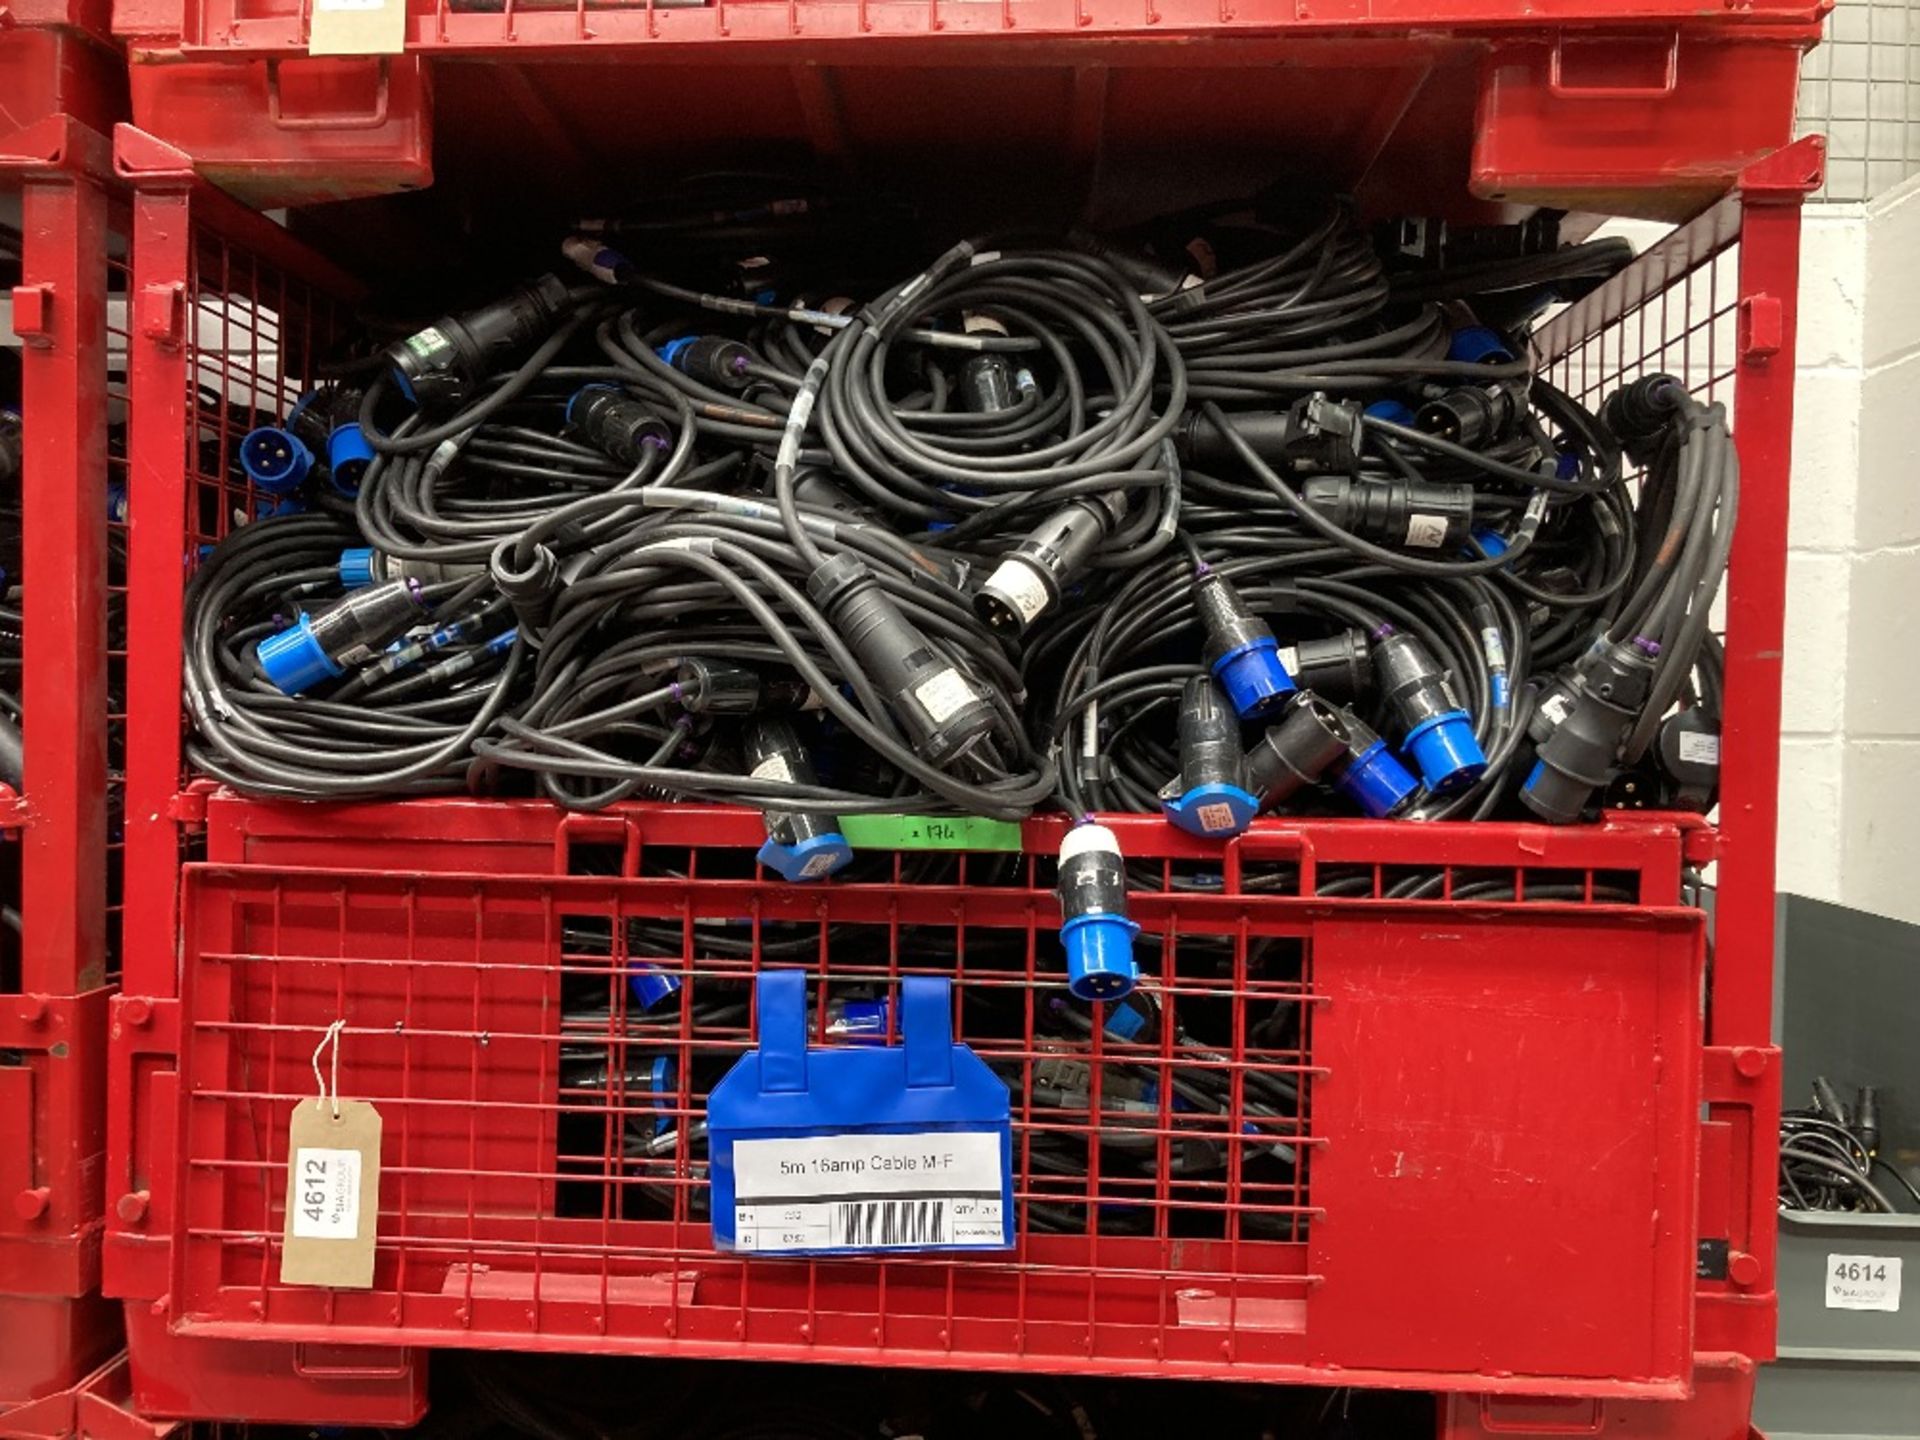 Large Quantity of 5m 16amp Cable M-F with Steel Fabricated Stillage